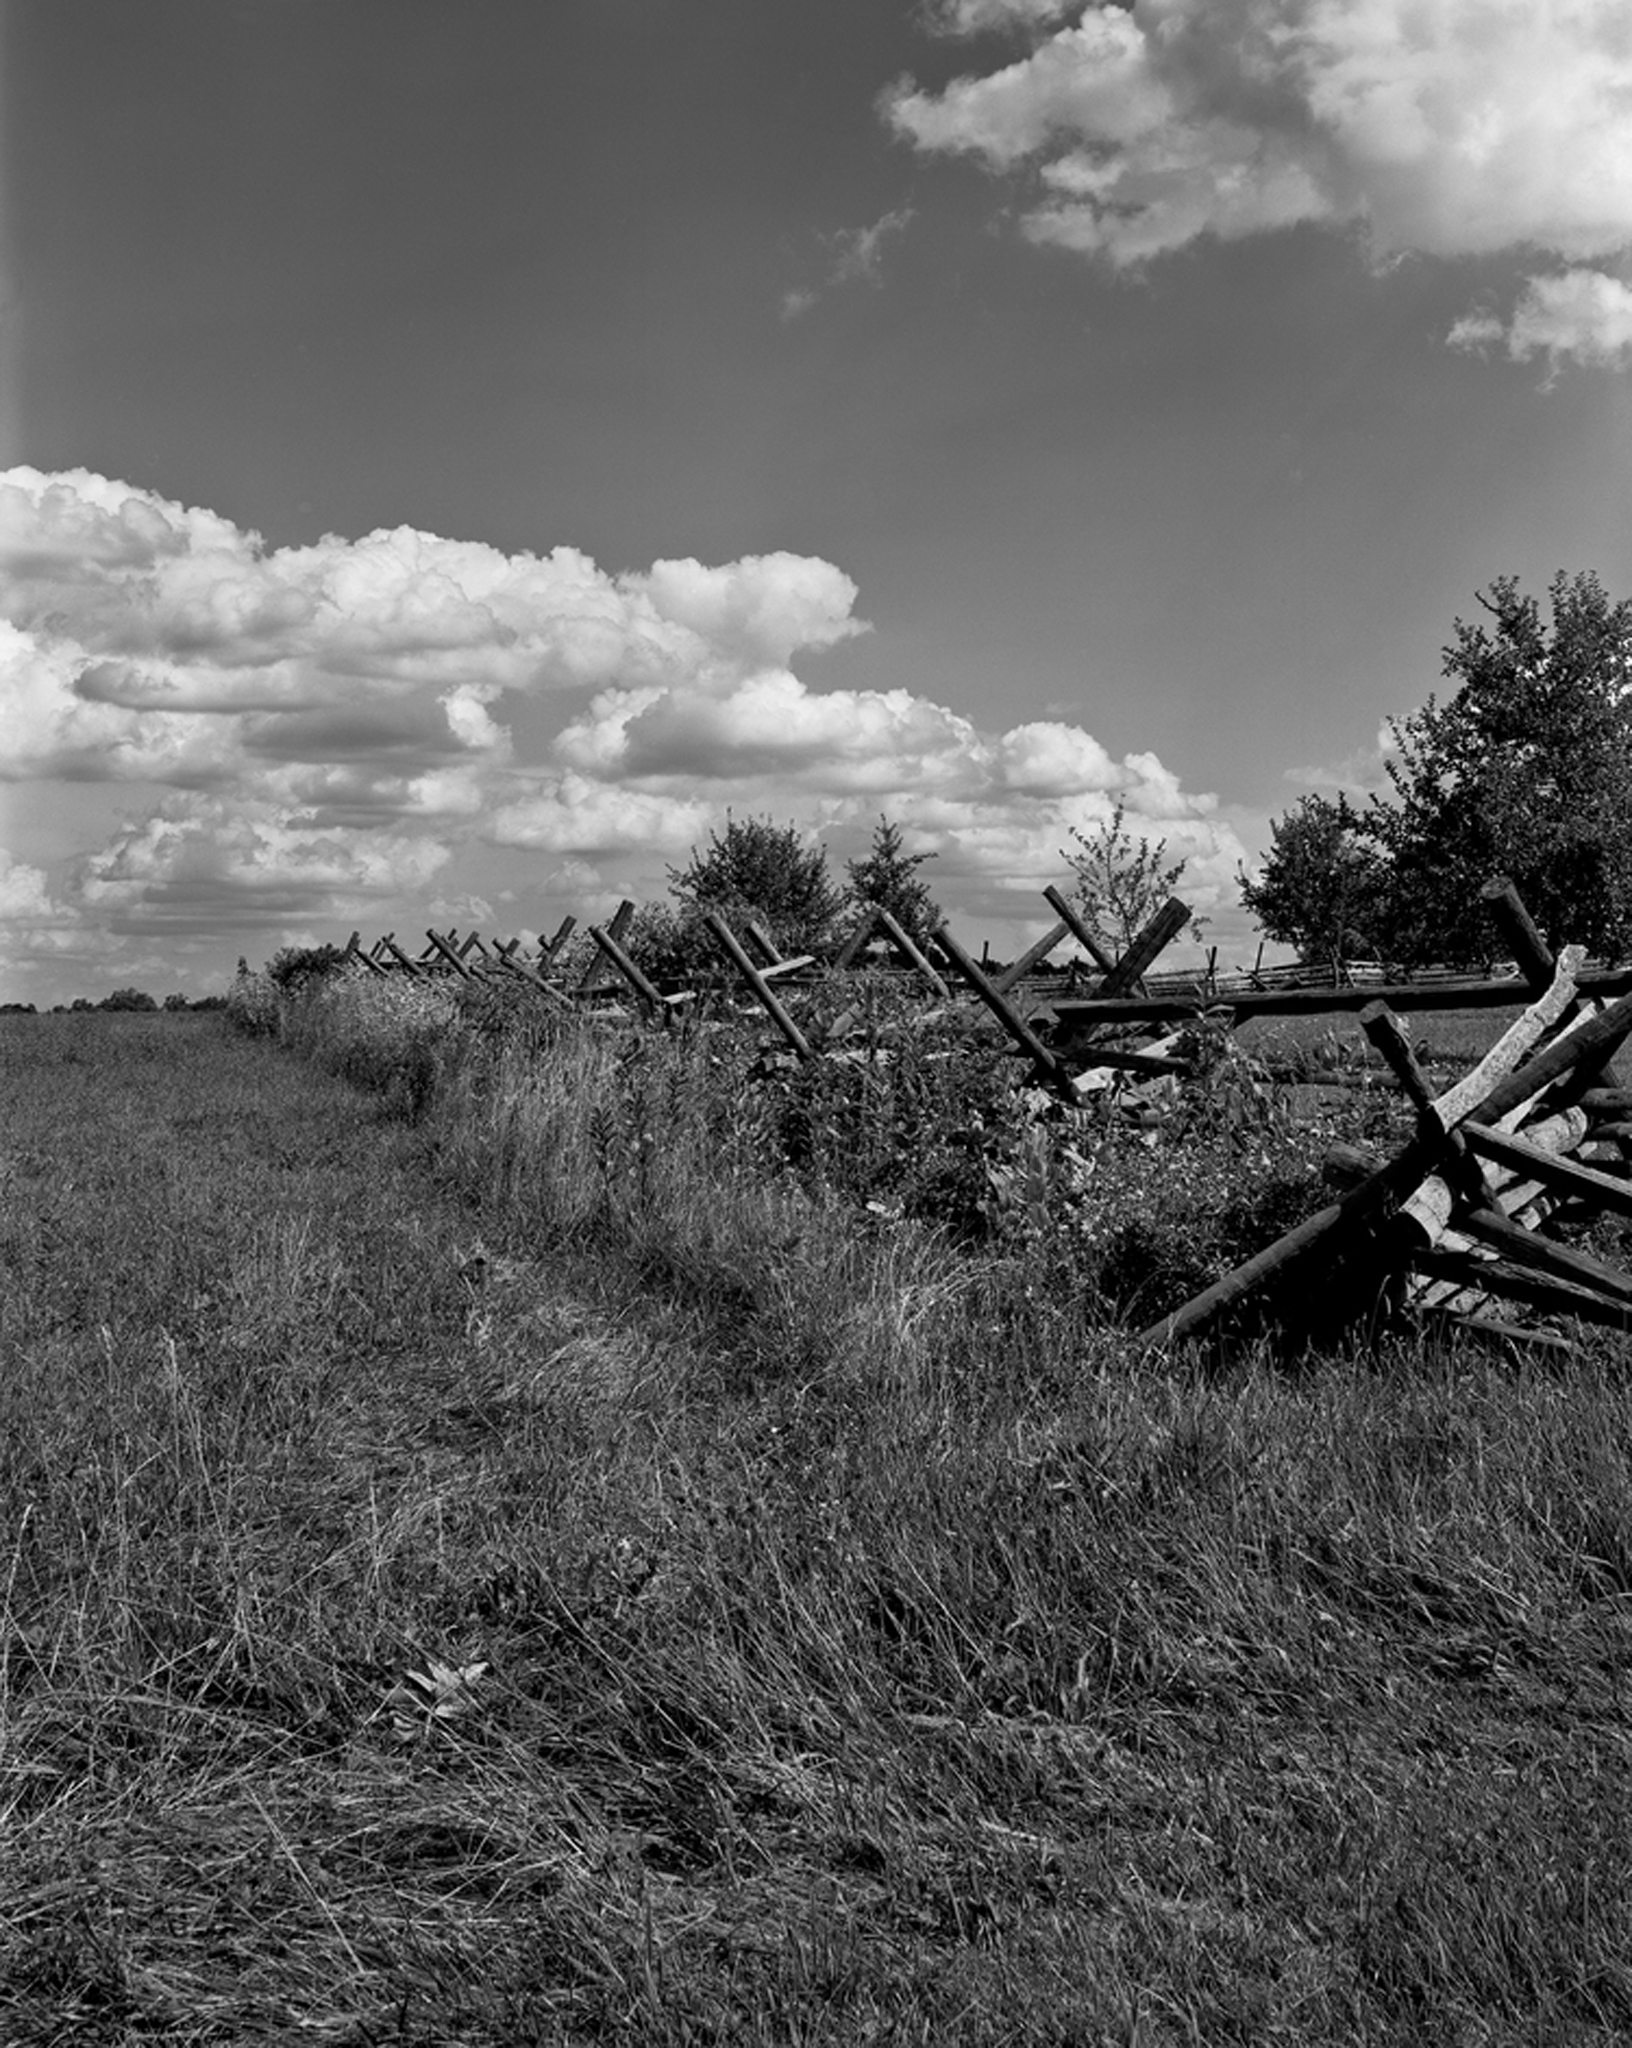  Virginia fencing in a field across from the The Joseph Sherfy barn at Gettysburg. 